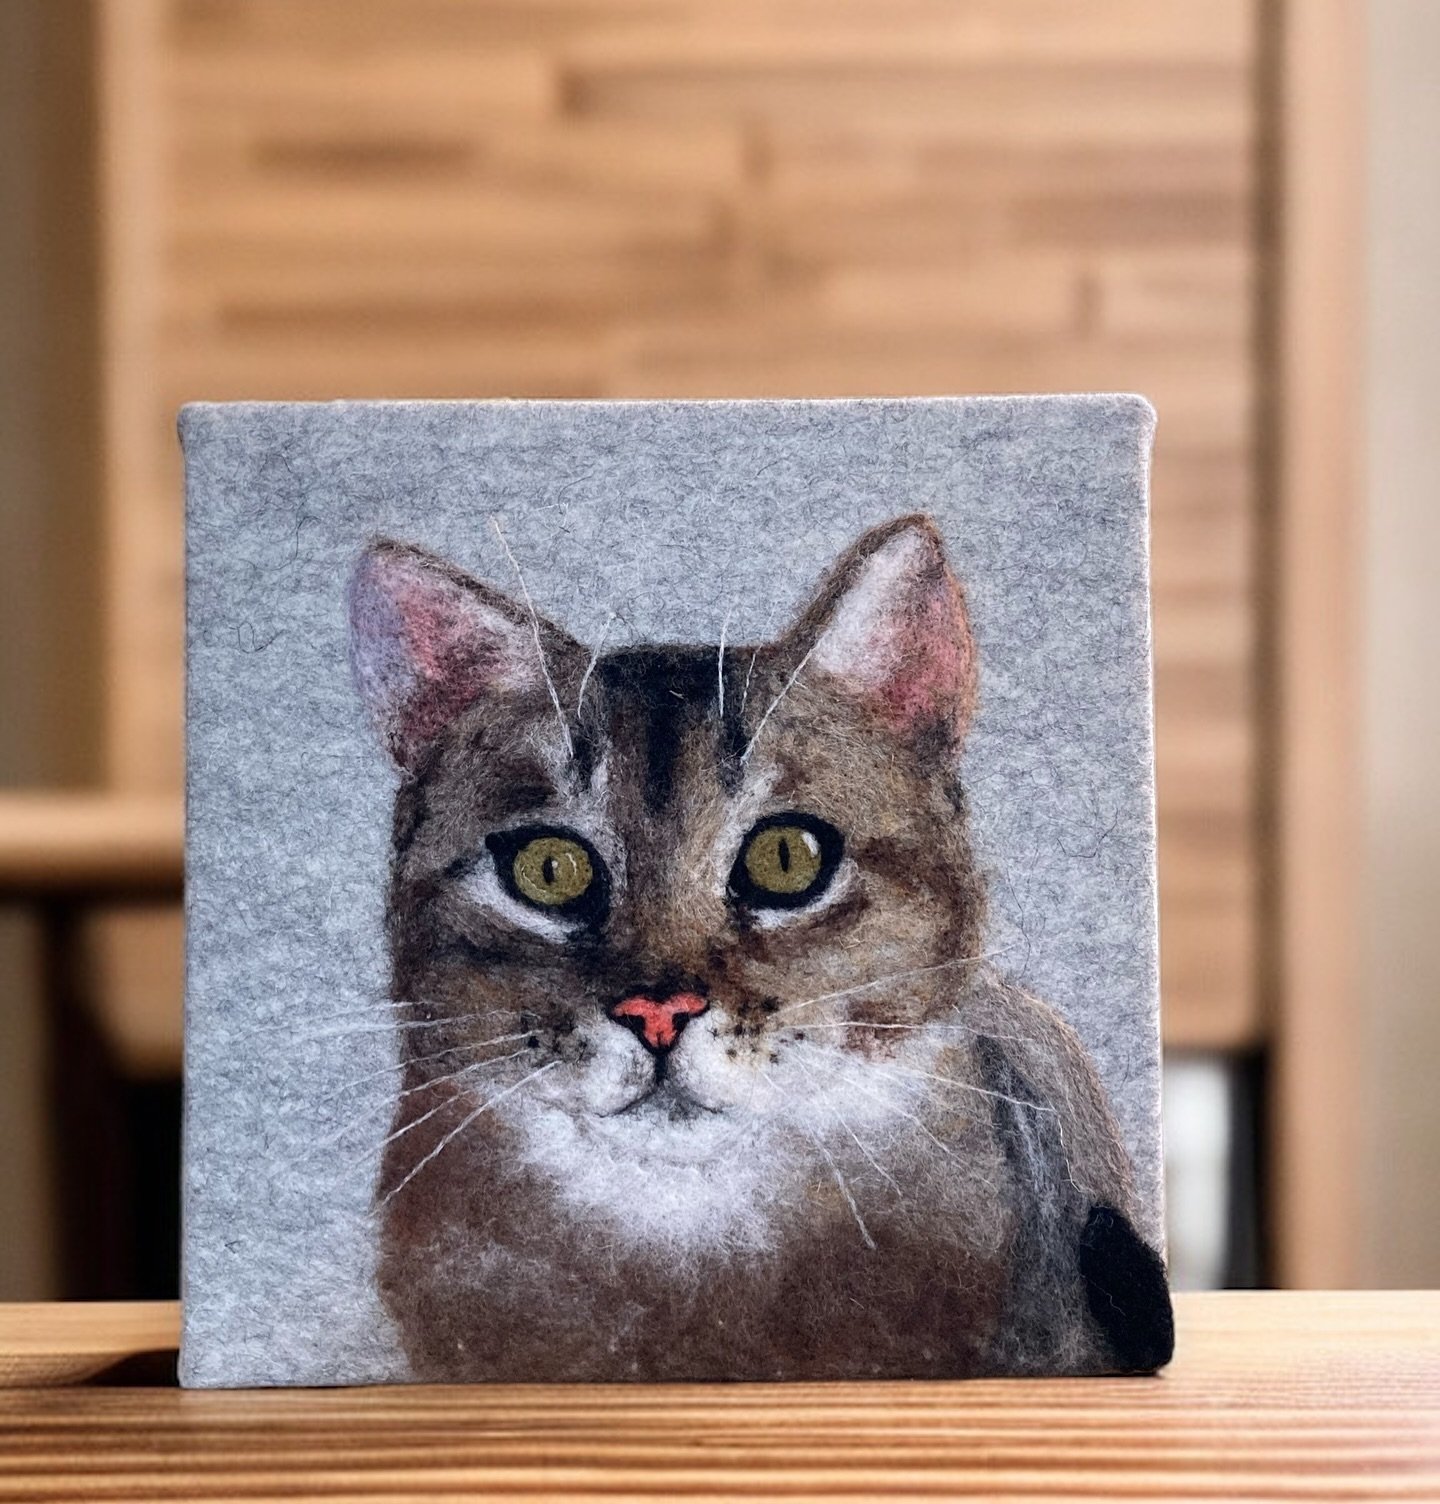 Hello everyone! I&rsquo;m sharing this kitty &ldquo;painting&rdquo; to remind you that if you&rsquo;d like to commission a pet portrait, shoot me a message and I&rsquo;ll give you an estimate! I say &ldquo;painting&rdquo; because to those of you that